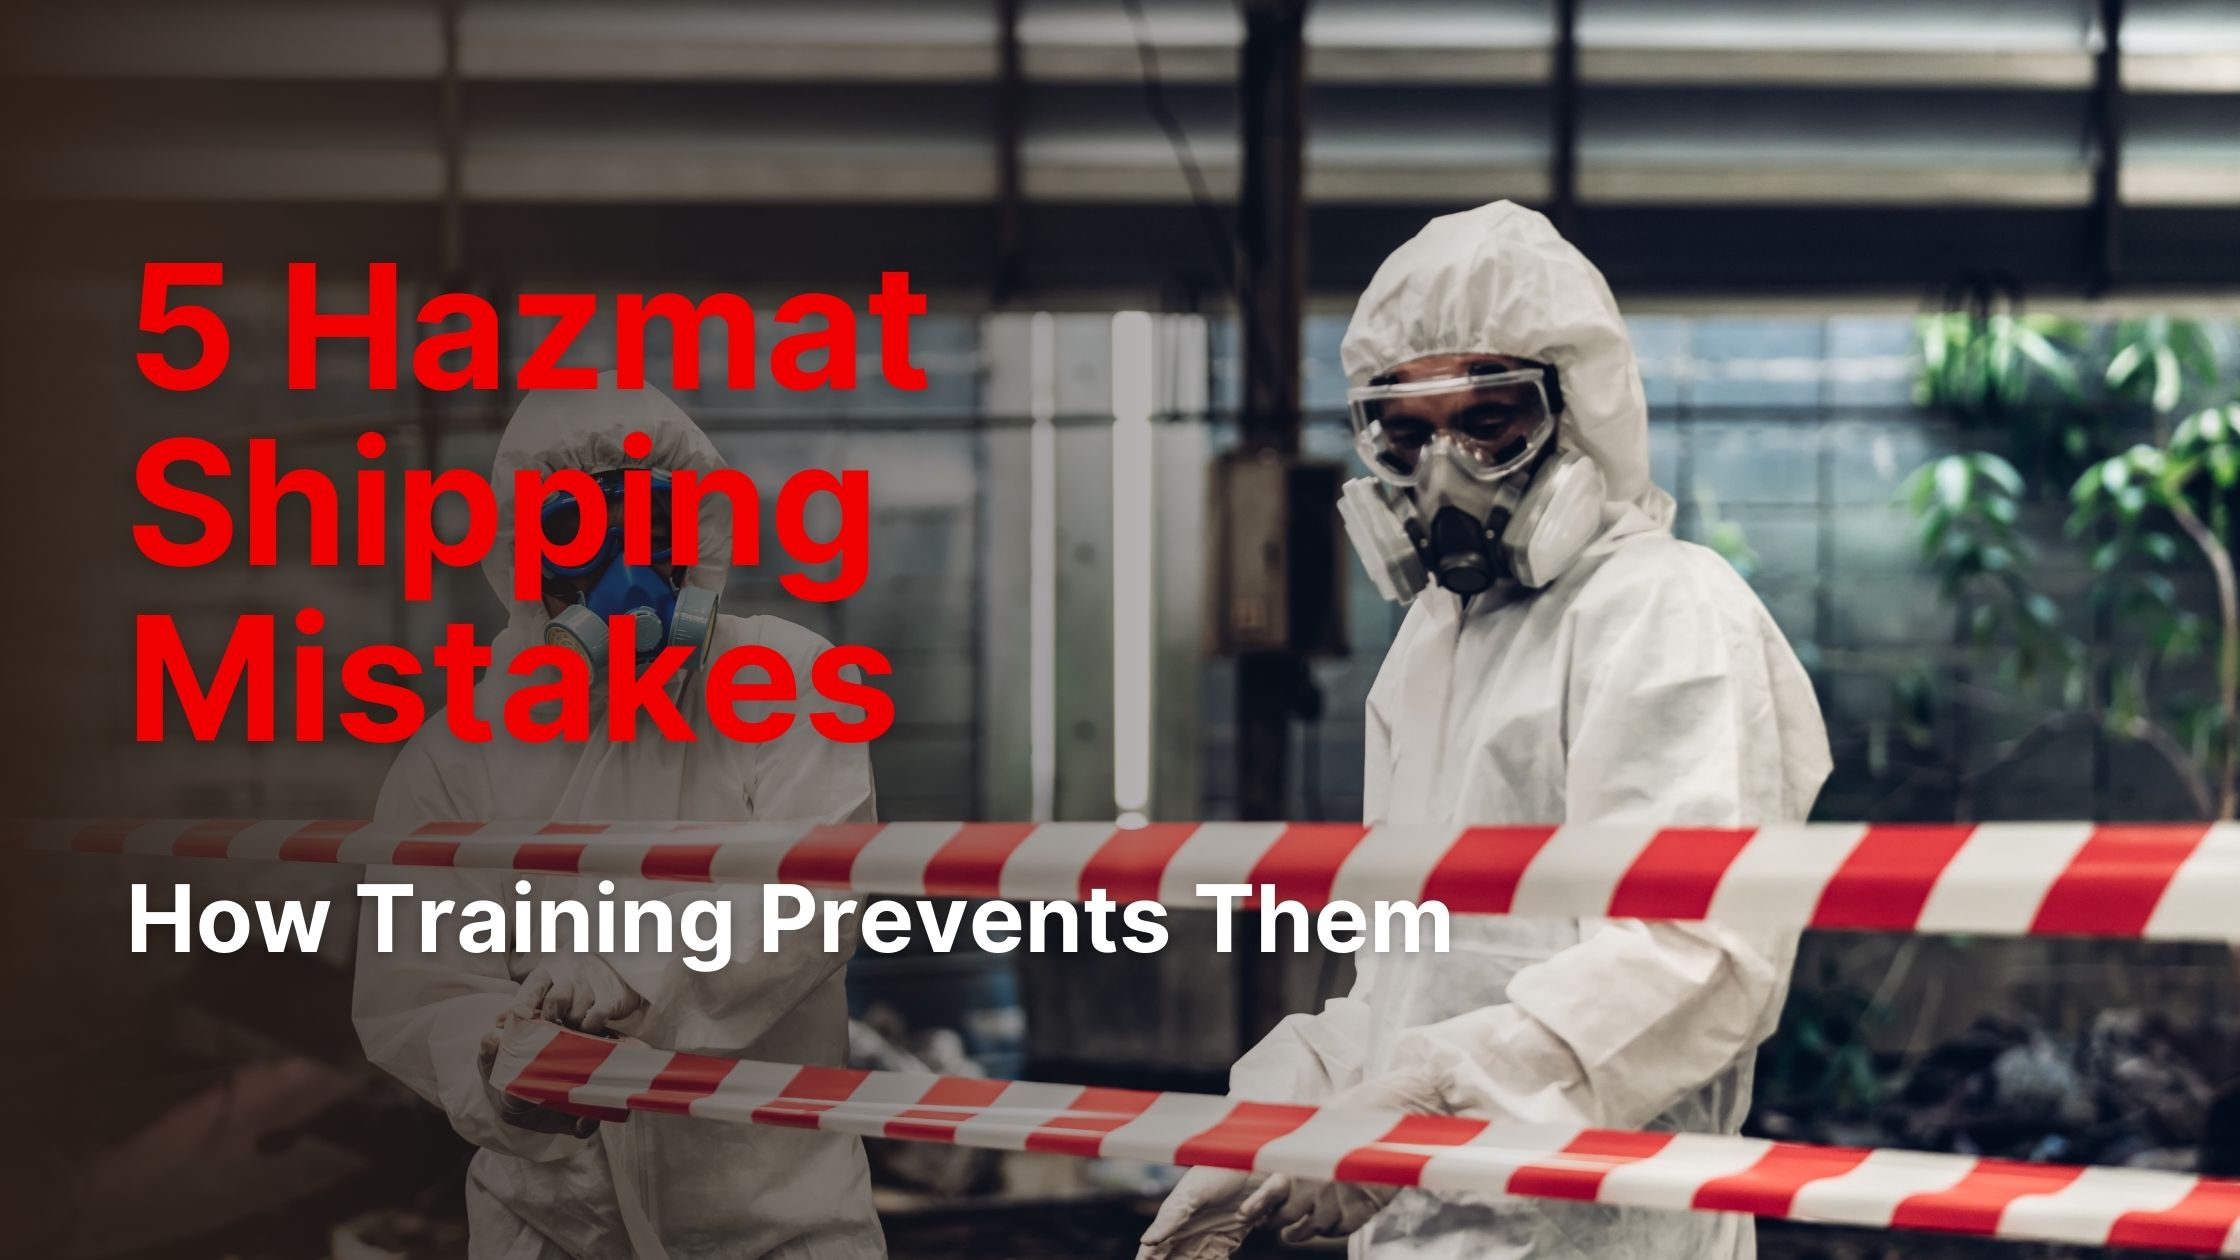 5 Hazmat Shipping Mistakes and How Training Prevents Them